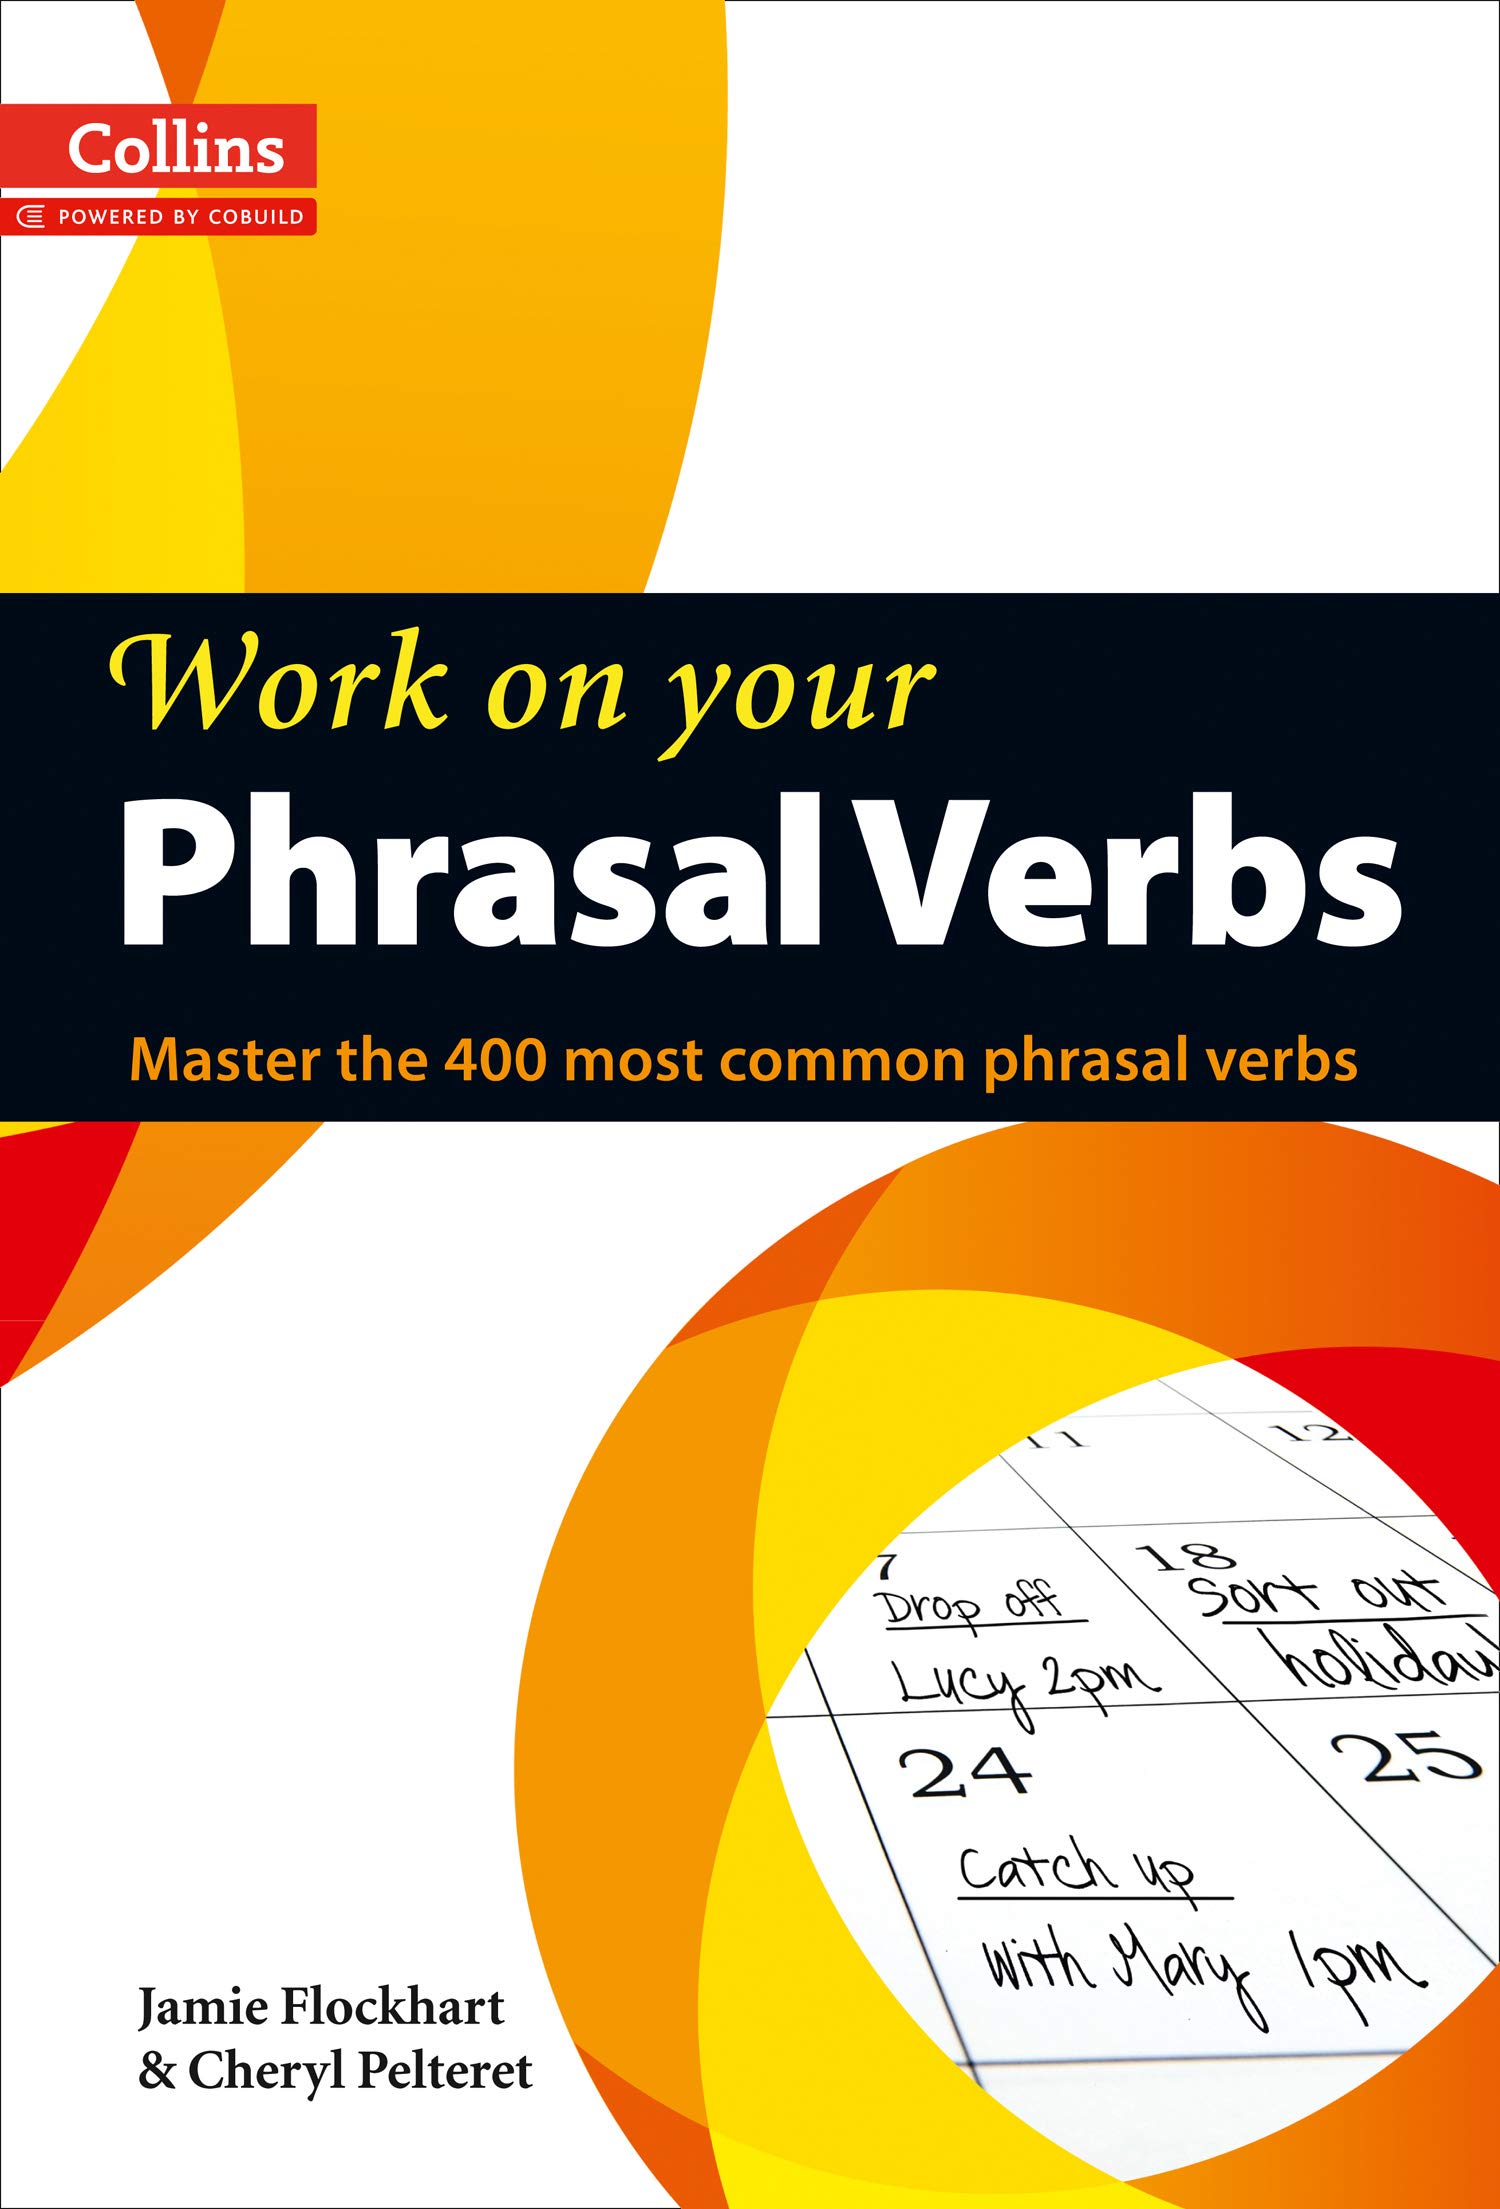 Collins - Work on your Phrasal Verbs